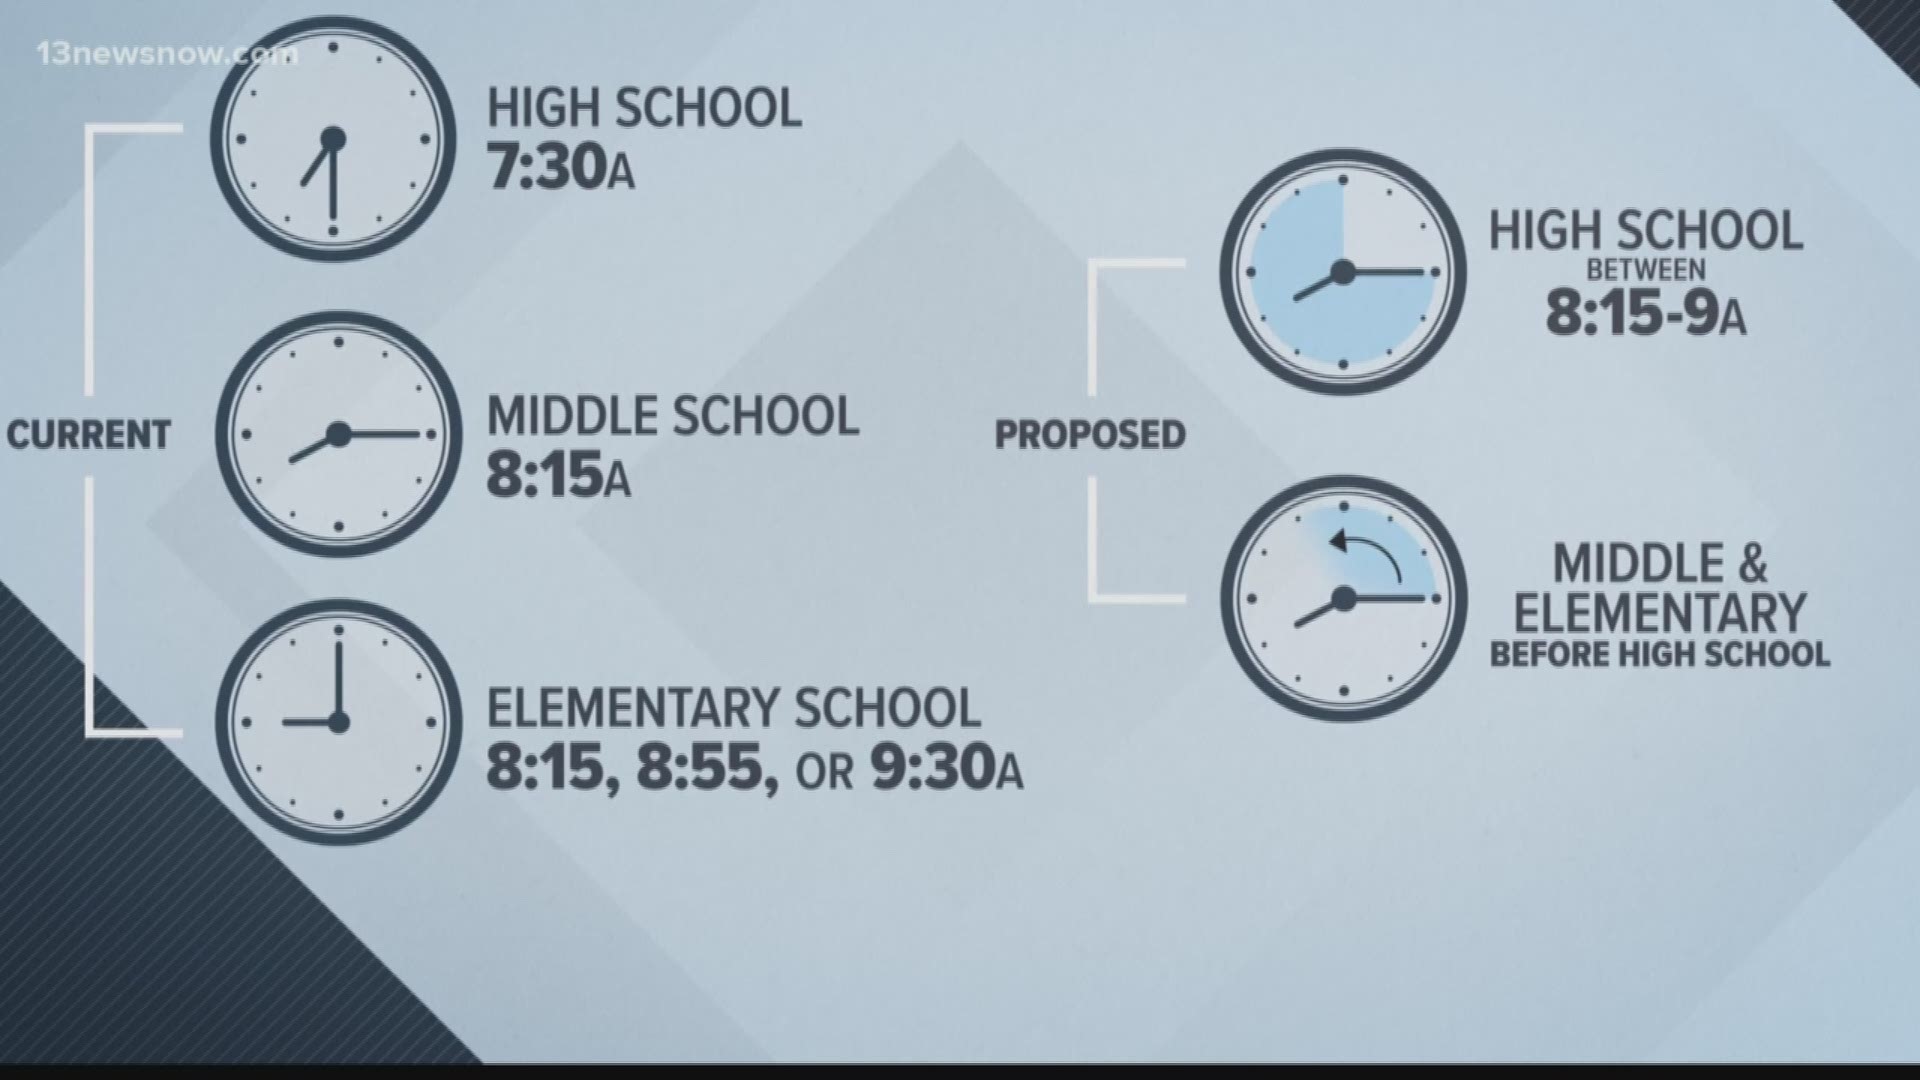 School district officials say that pushing back start times as much as an hour could improve test scores, attendance, and graduation rates.